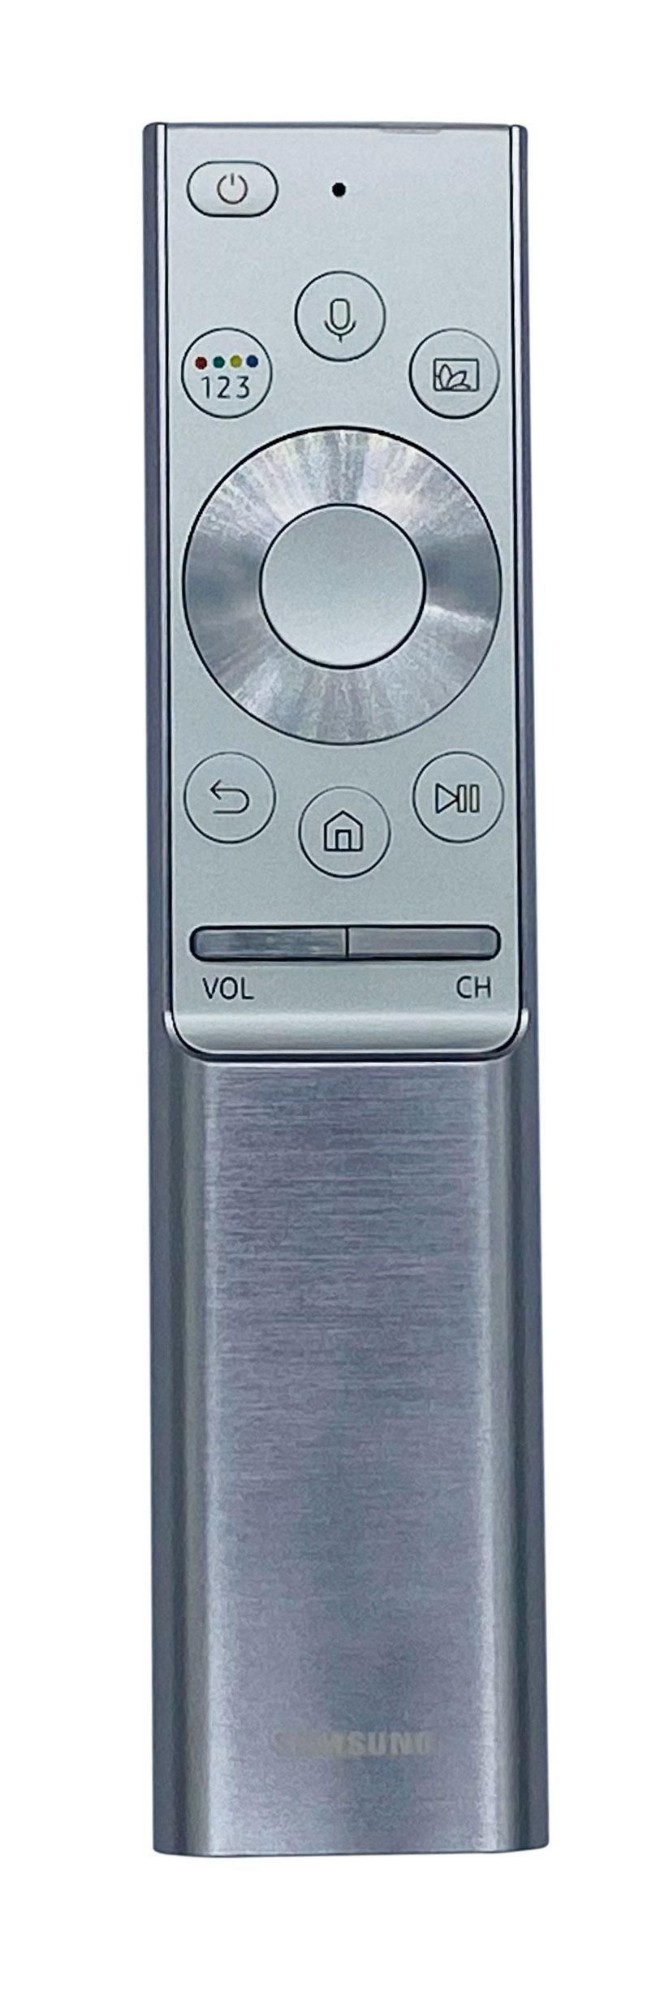 Photos - Other for Computer Samsung Smart Remote Control - Approx 1-3 working day lead. BN59-01300J 